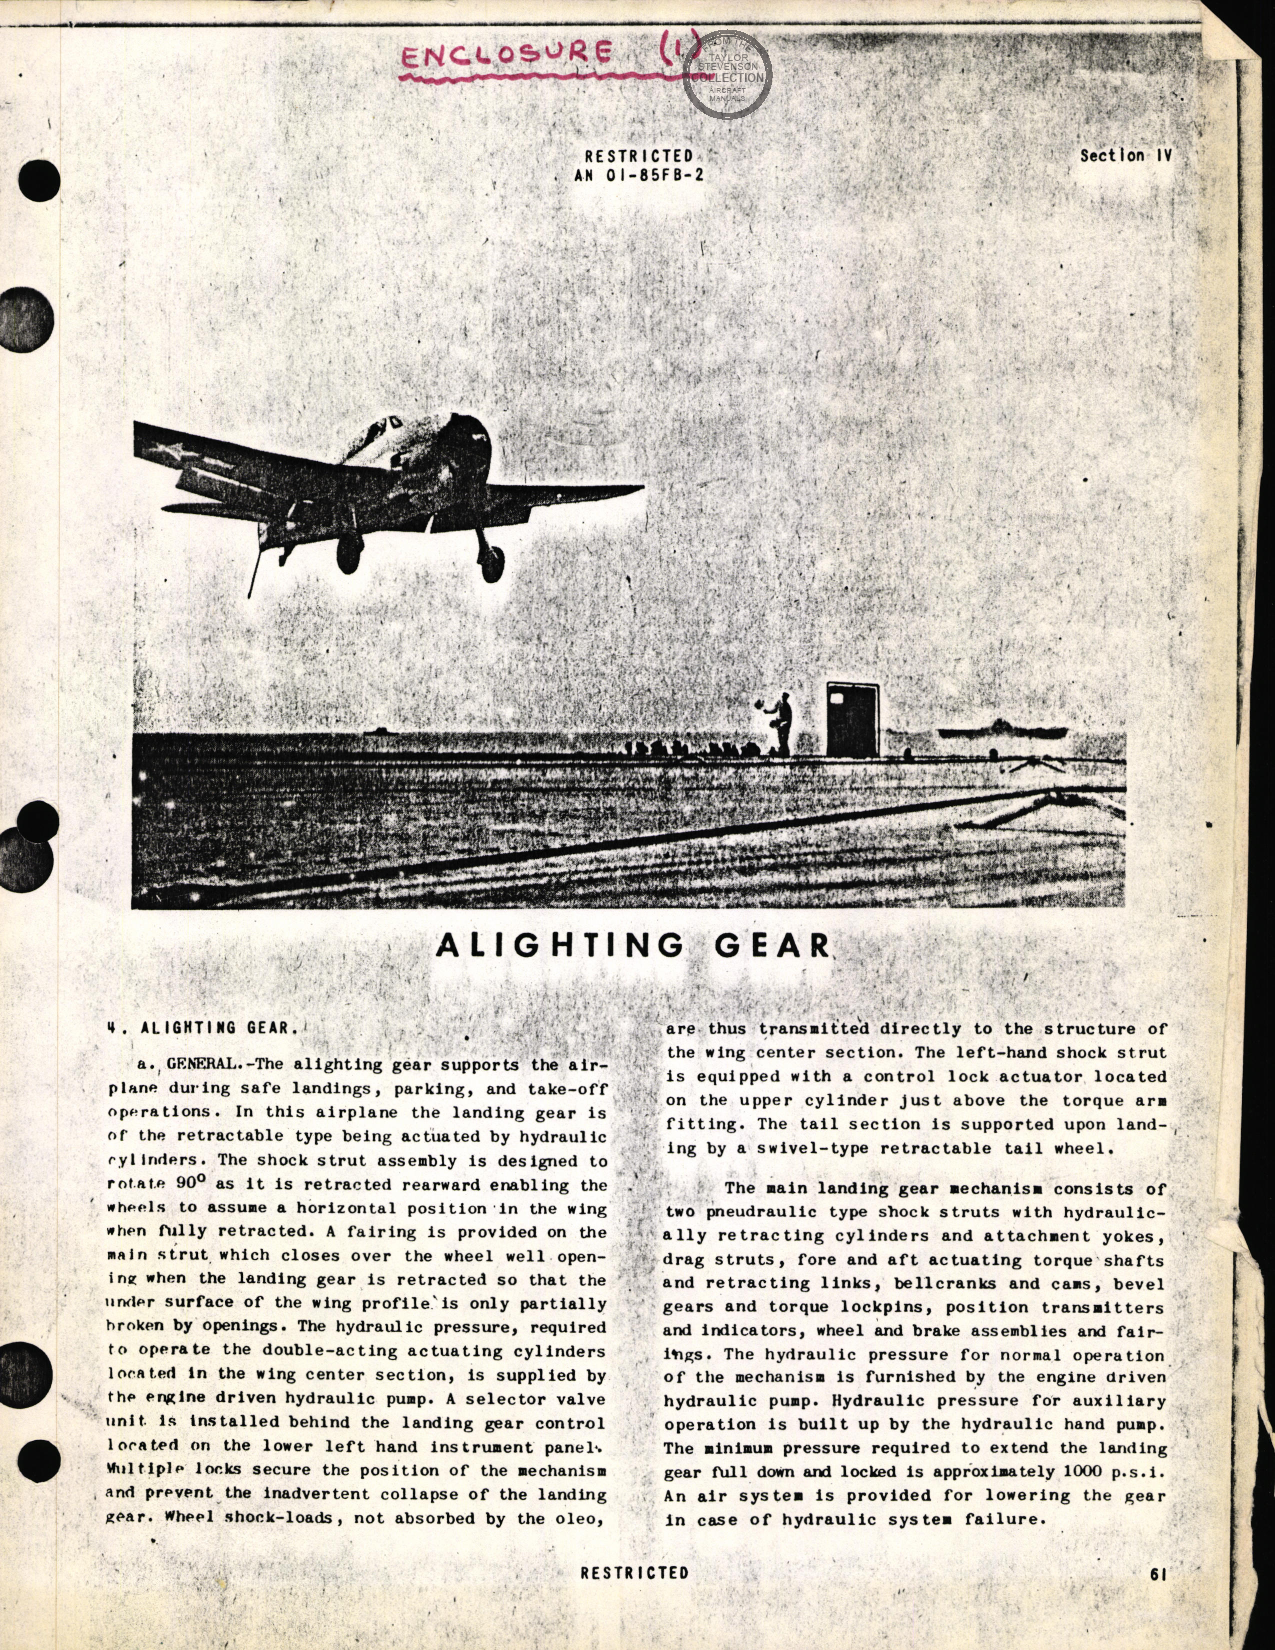 Sample page 1 from AirCorps Library document: Maintenance Manual (partial) - F6F 